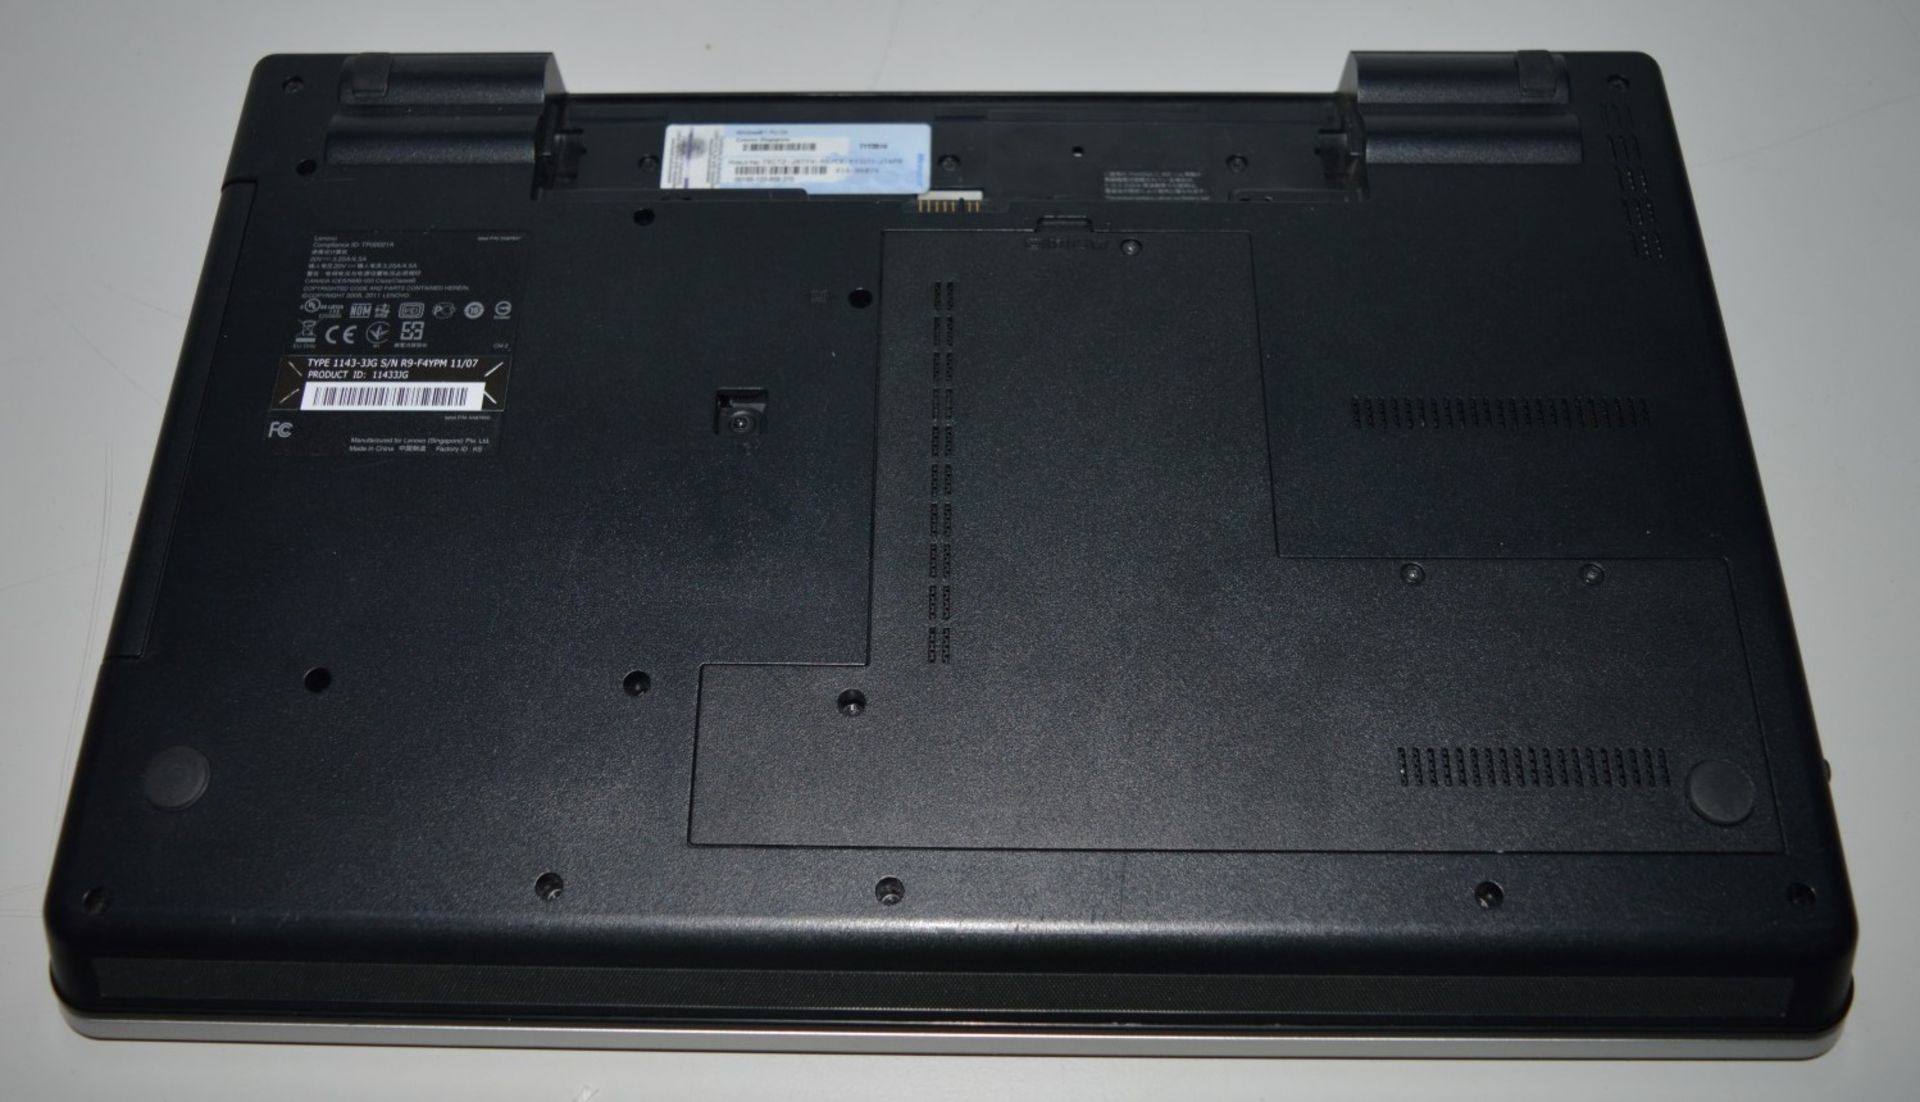 1 x Lenovo Thinkpad Laptop Computer With Intel Core i3 Processor and 15.4 Inch Screen - CL300 - - Image 6 of 7